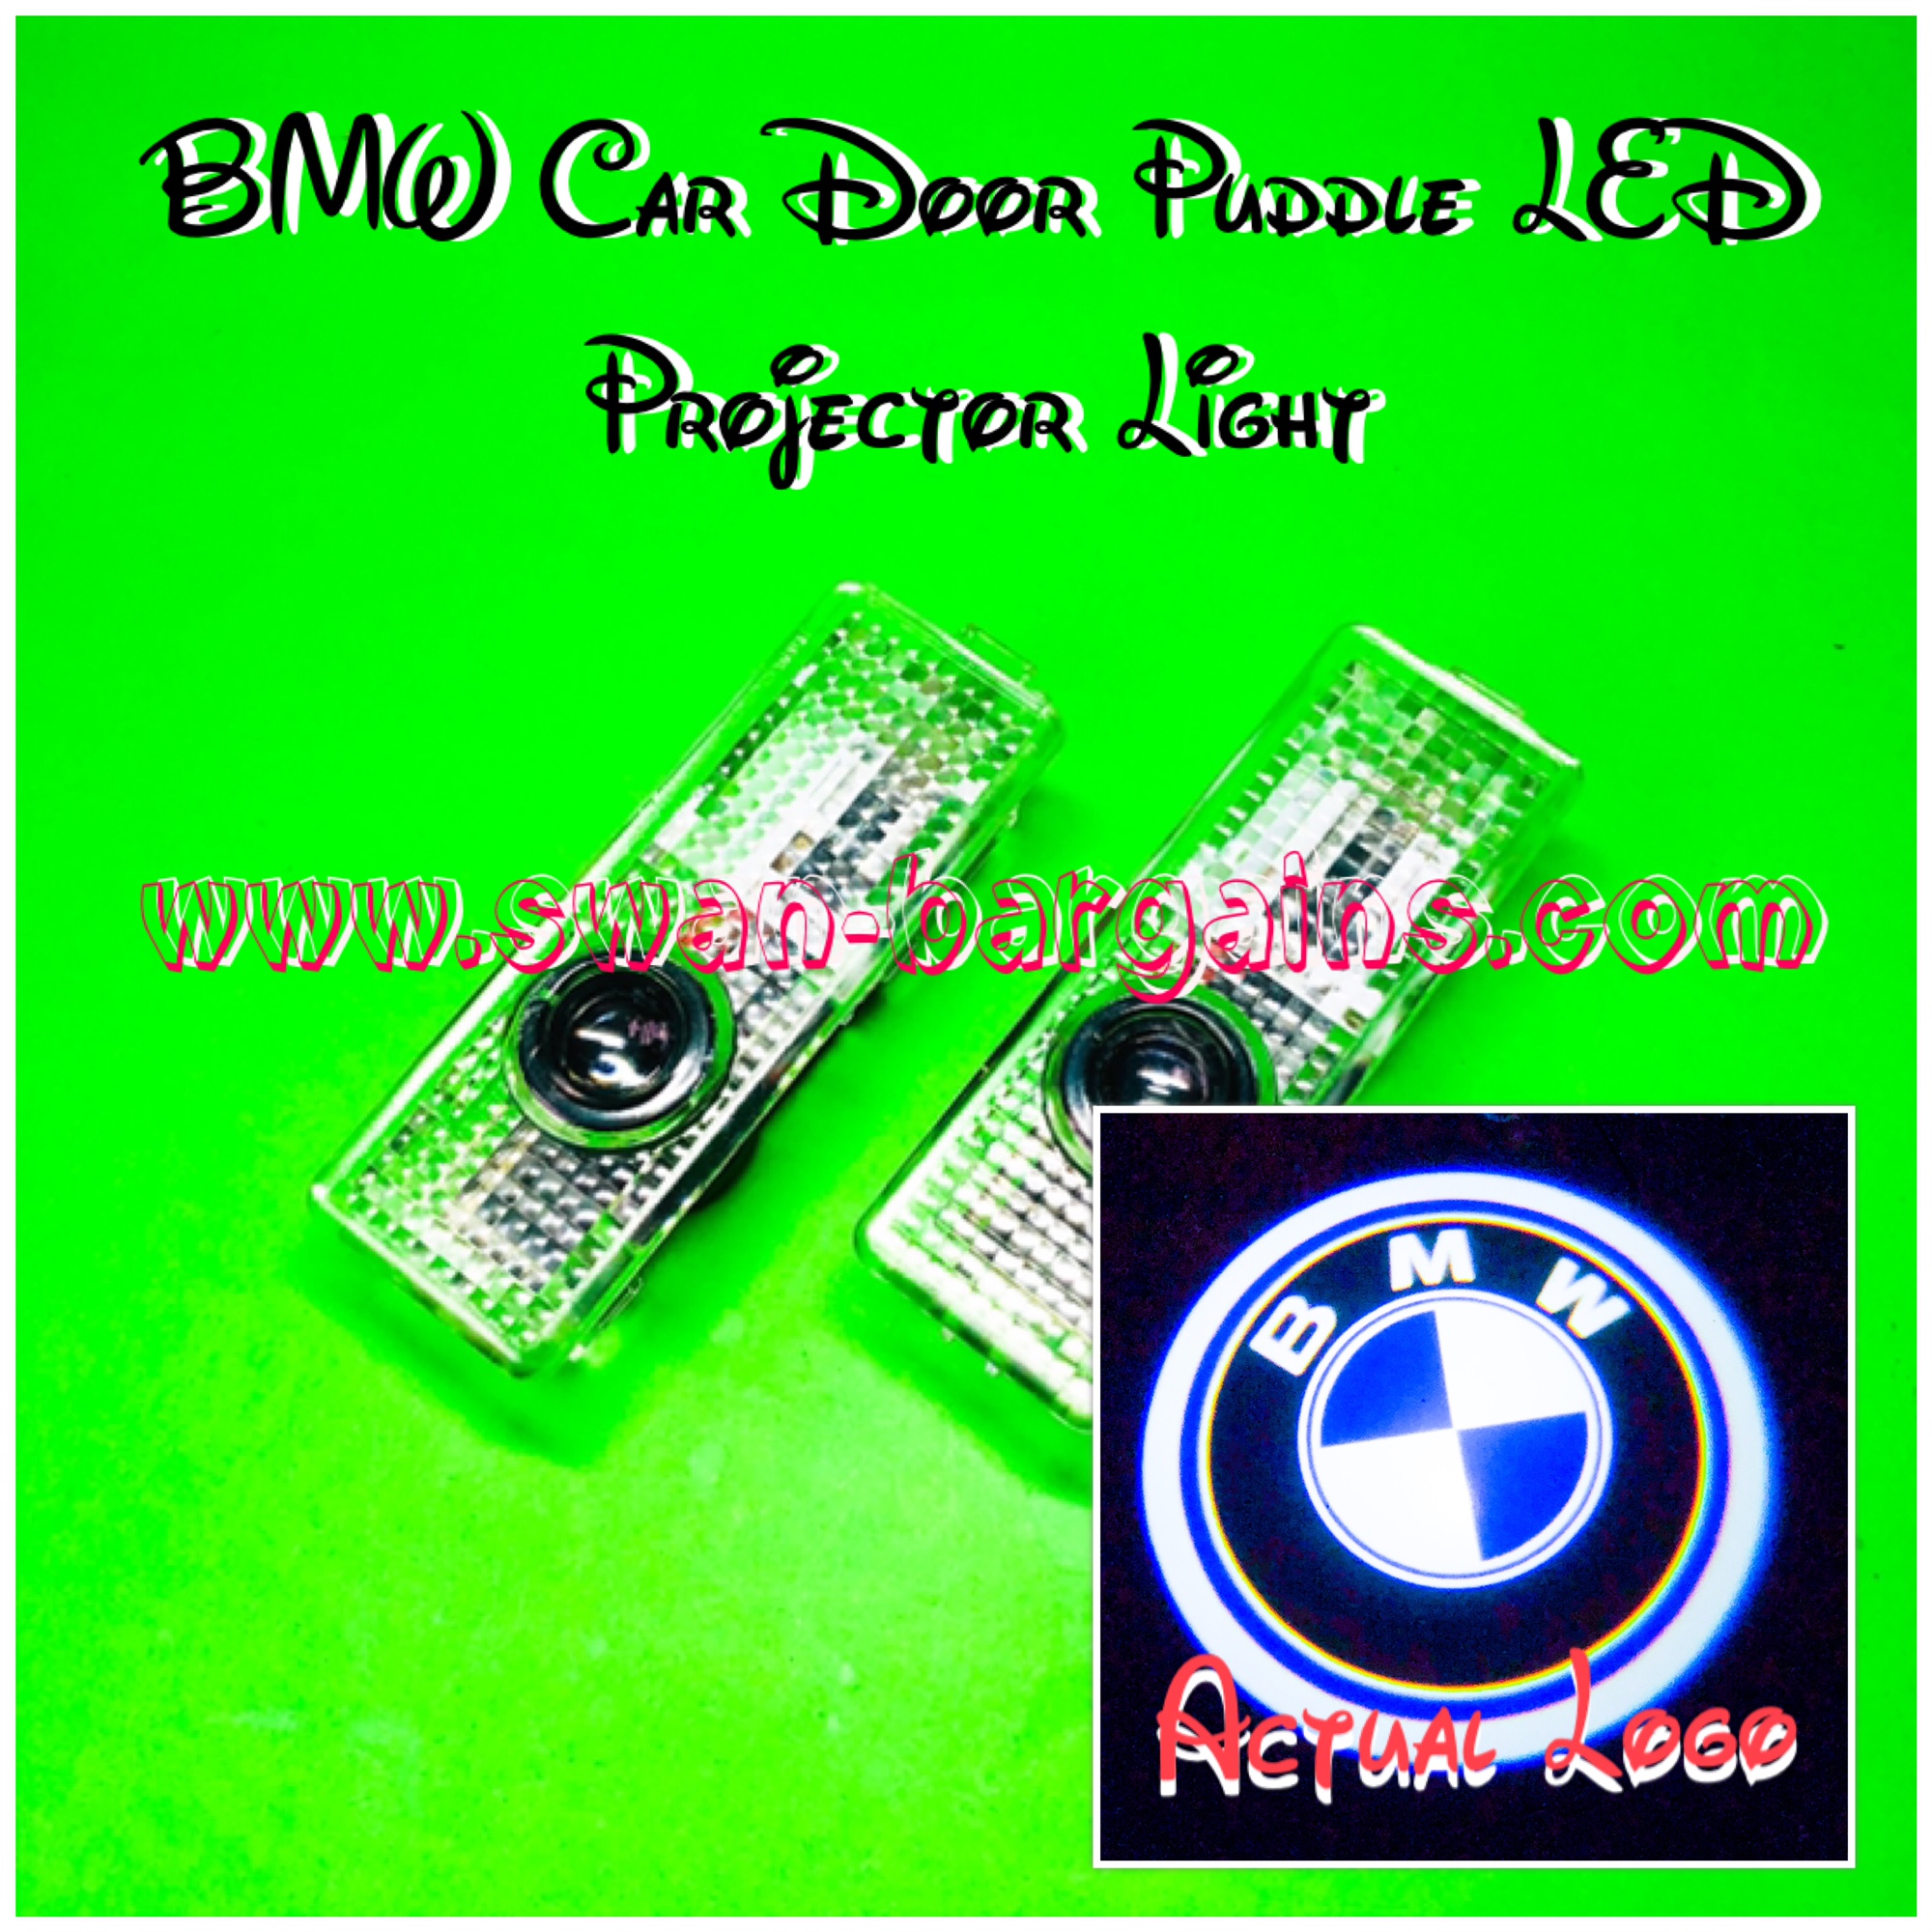 https://swan-bargains.com/wp-content/uploads/BMW-Integrated-Door-Courtesy-LED-Projector-Lamp-Singapore-Classic-Blue-White.jpg